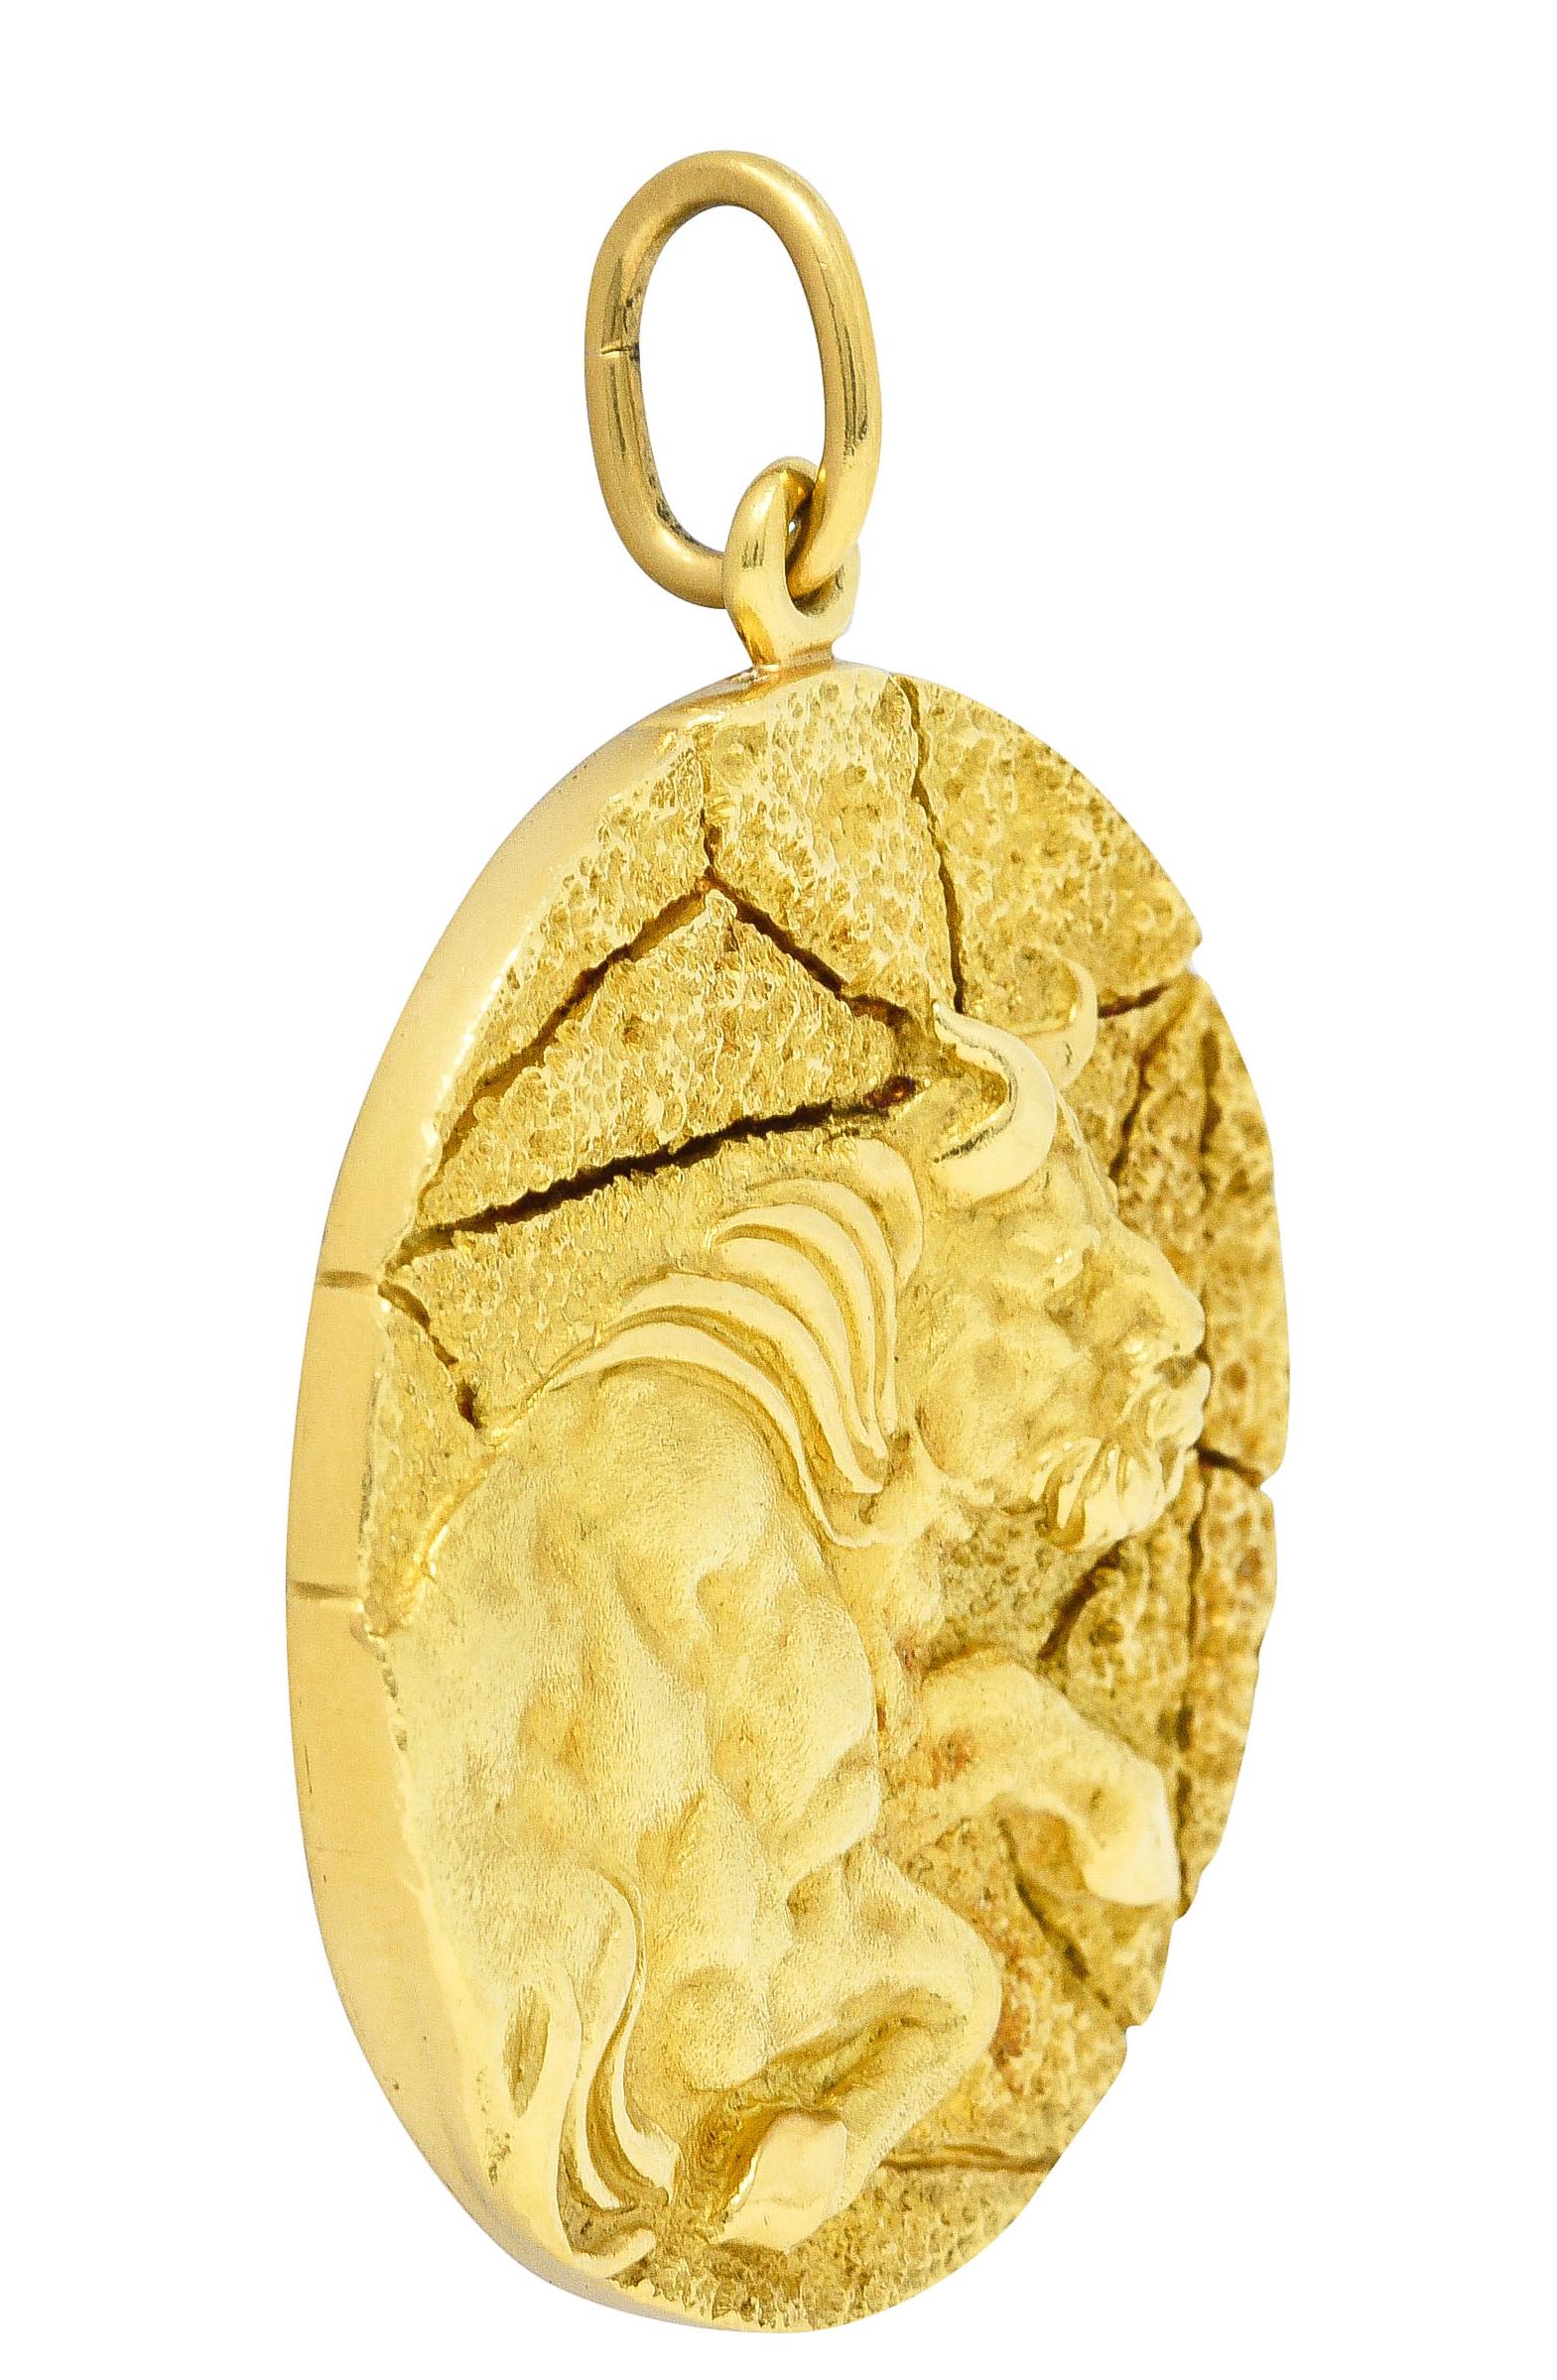 Substantial circular pendant is designed with a textured cracked earth motif

Depicting a highly rendered image of a rearing bull with high polished accents

Back features a stylized Taurus zodiac sign - brightly polished

Stamped K18 for 18 karat